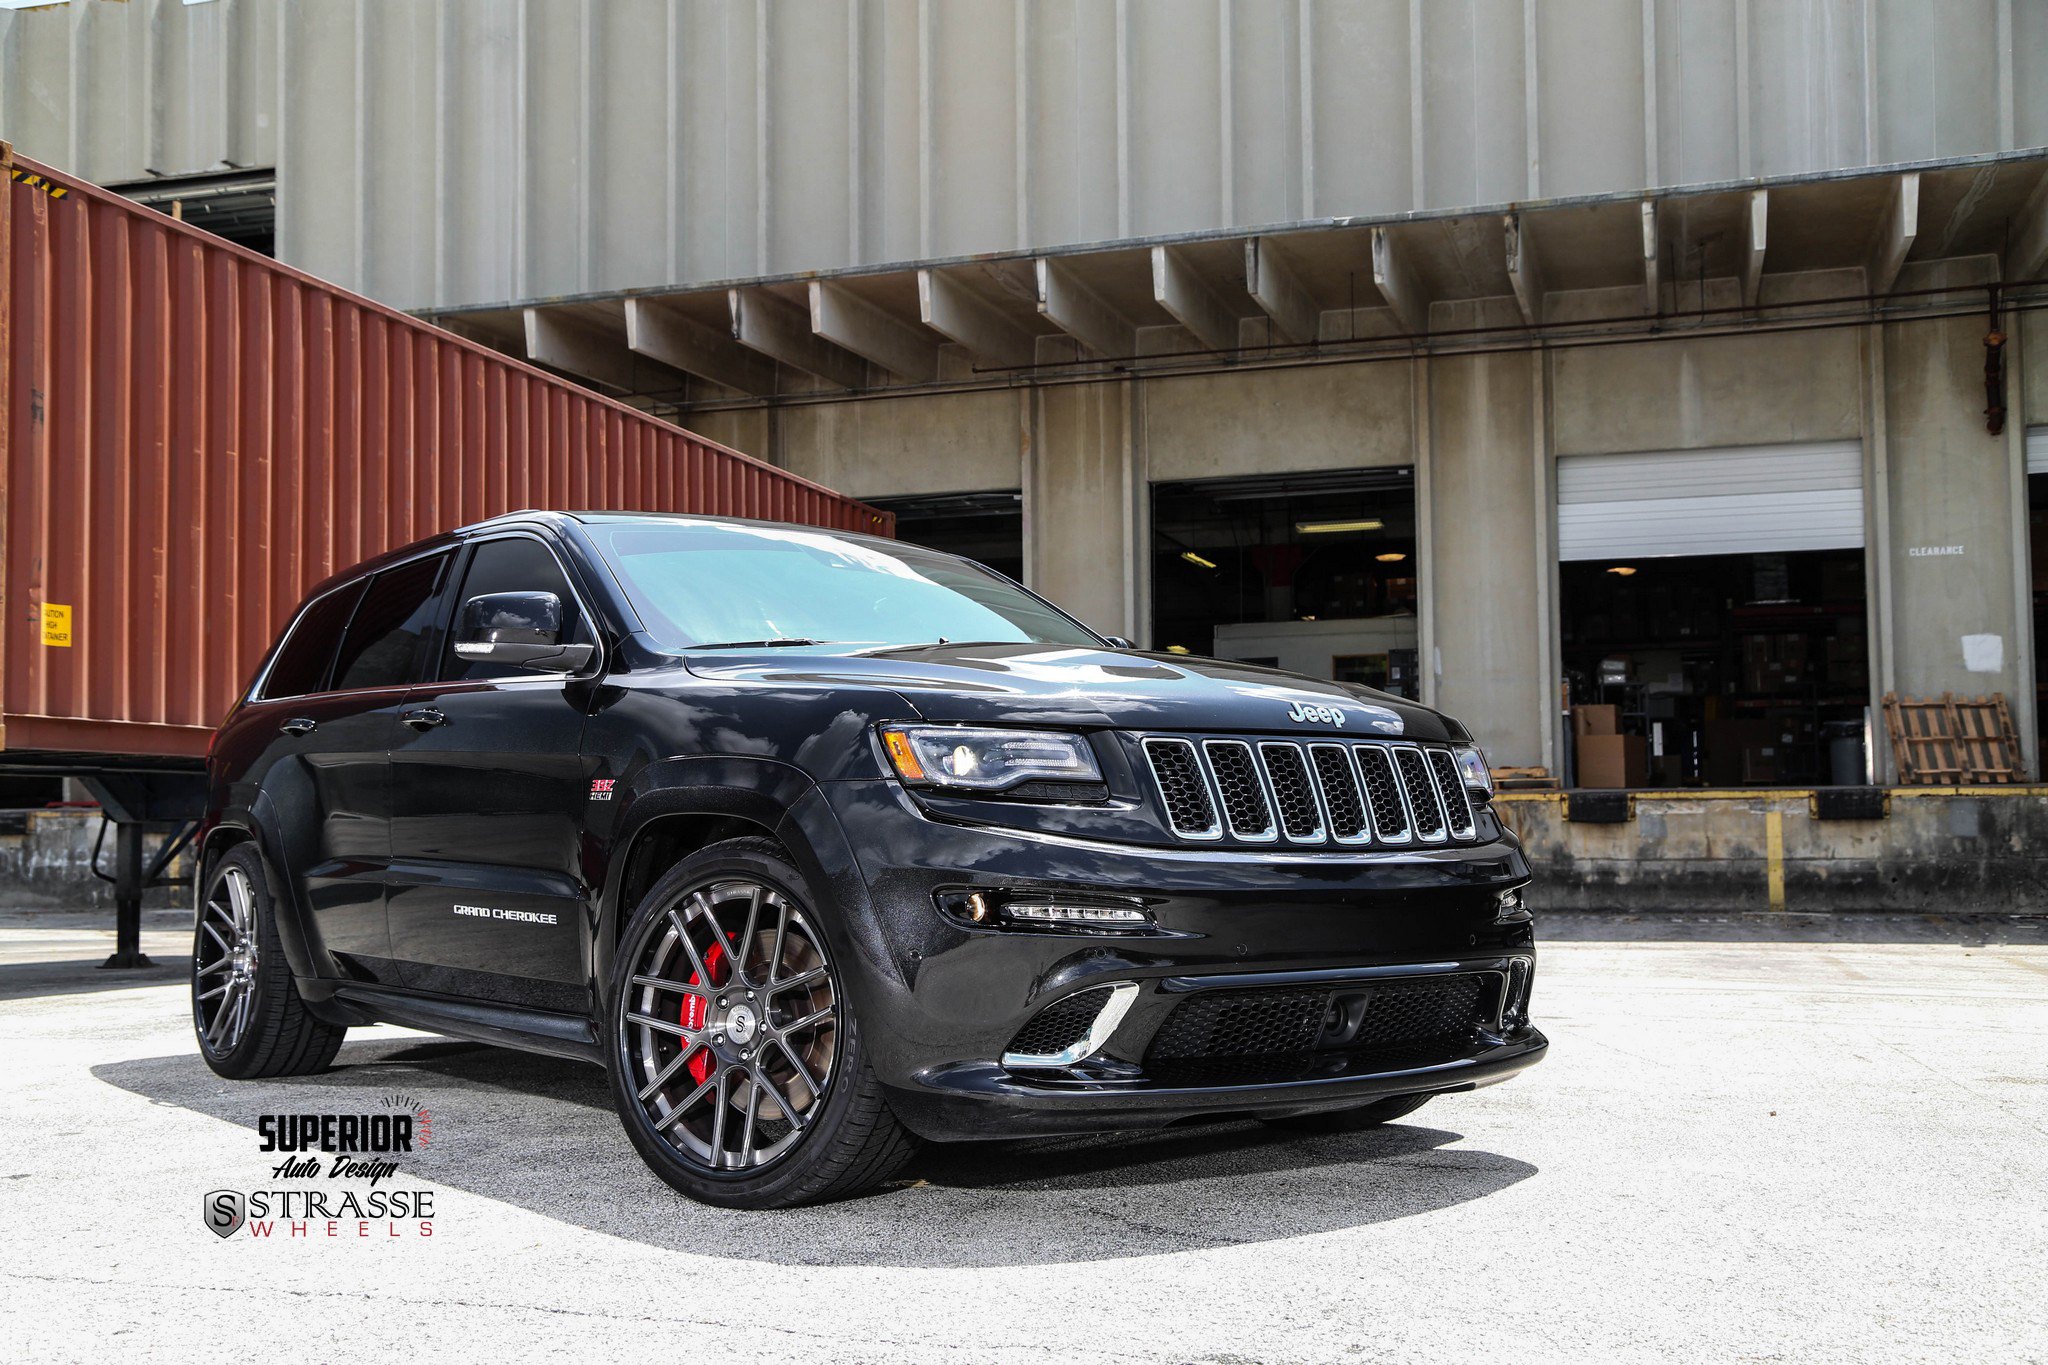 Custom Front Bumper on Black Jeep Grand Cherokee - Photo by Strasse Forged